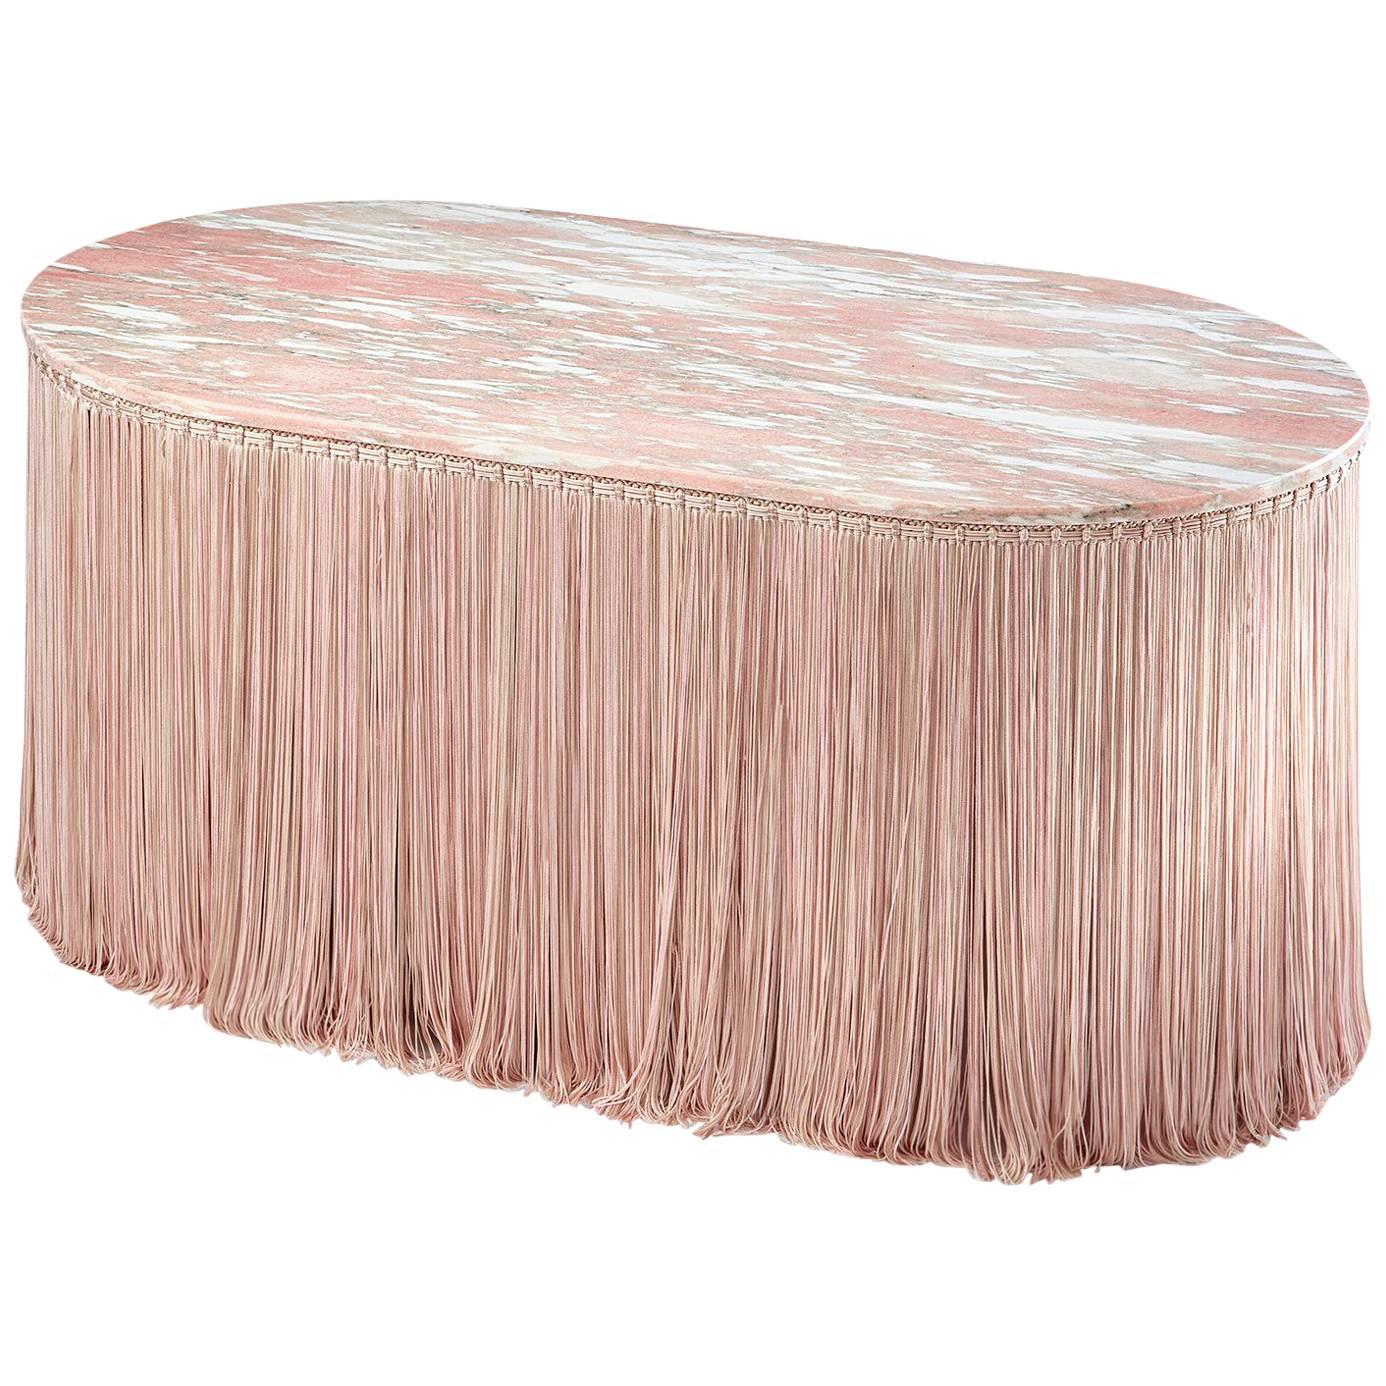 Tripolino M Low Table in Marble Fringes by Cristina Celestino X Editions, Milano For Sale